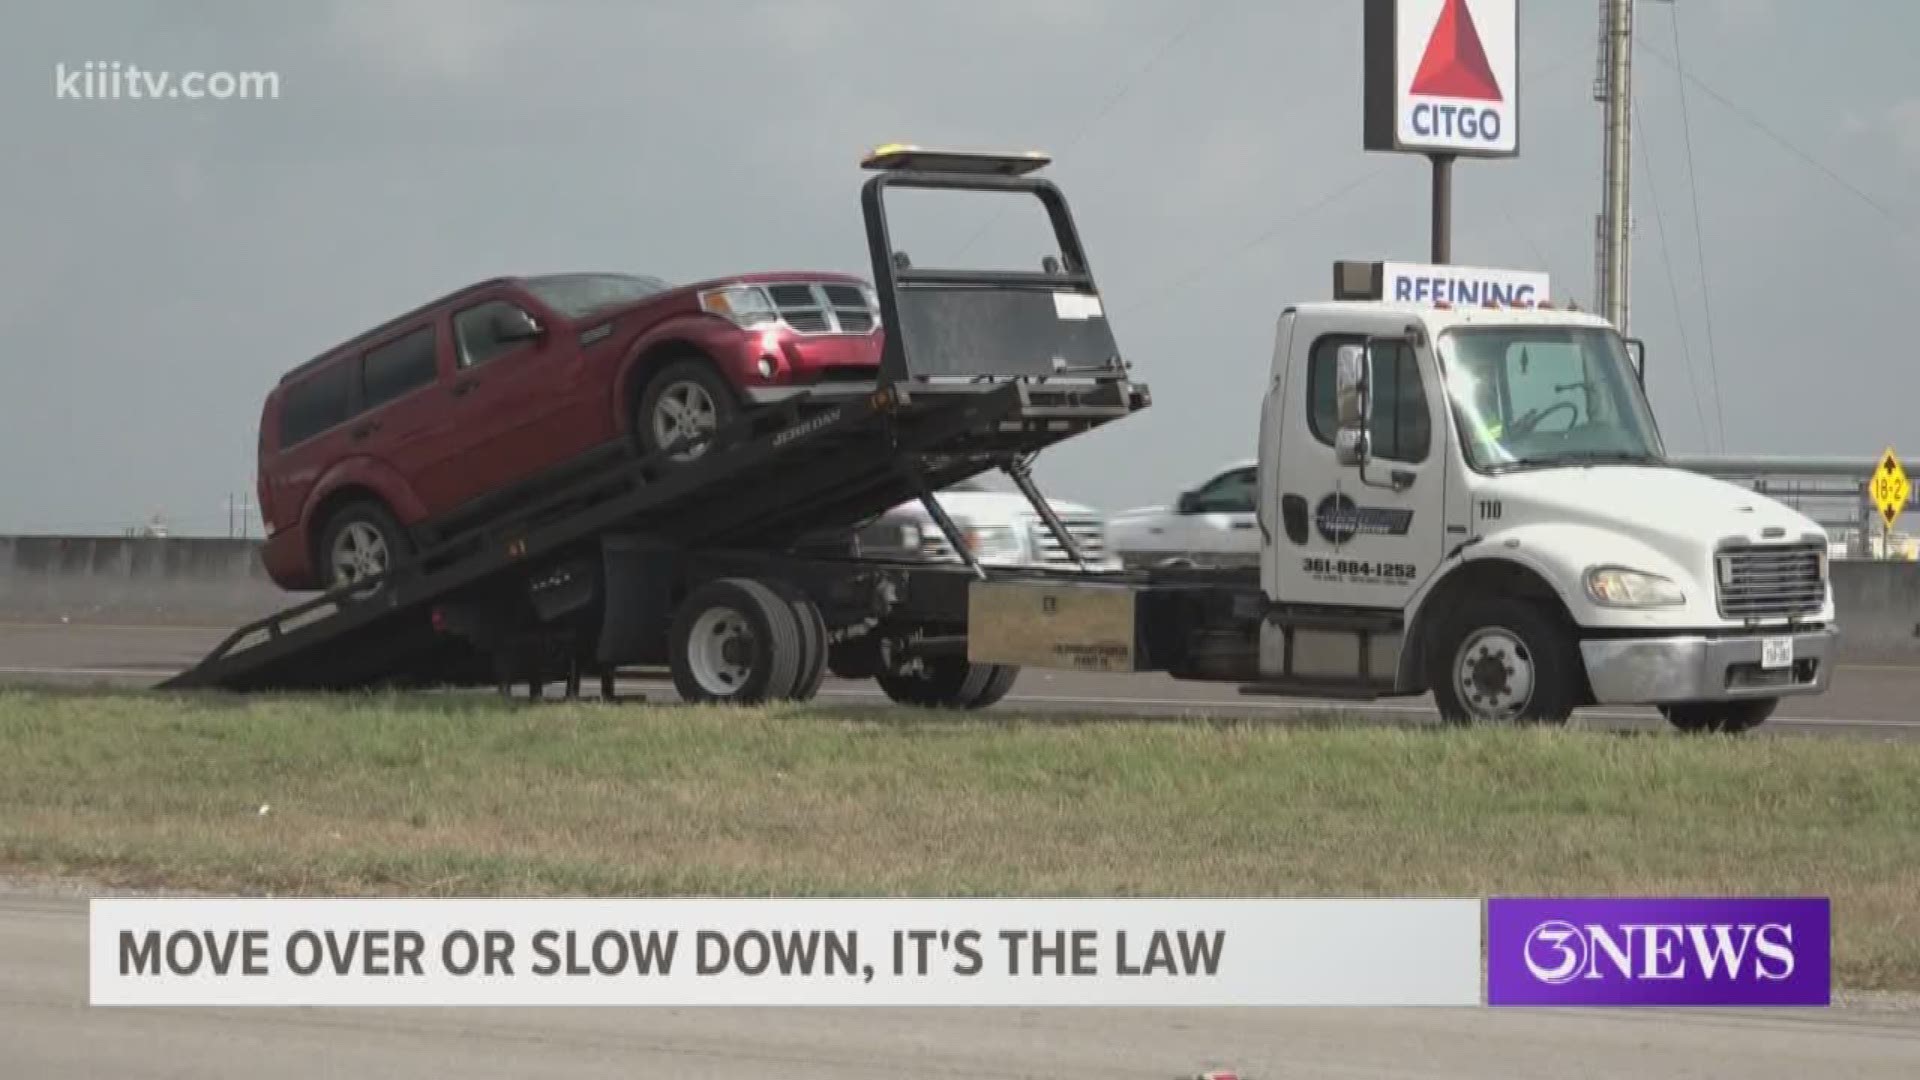 The Corpus Christi Police Department is sending out a friendly reminder that if you see an emergency vehicle on the side of the road, move over.